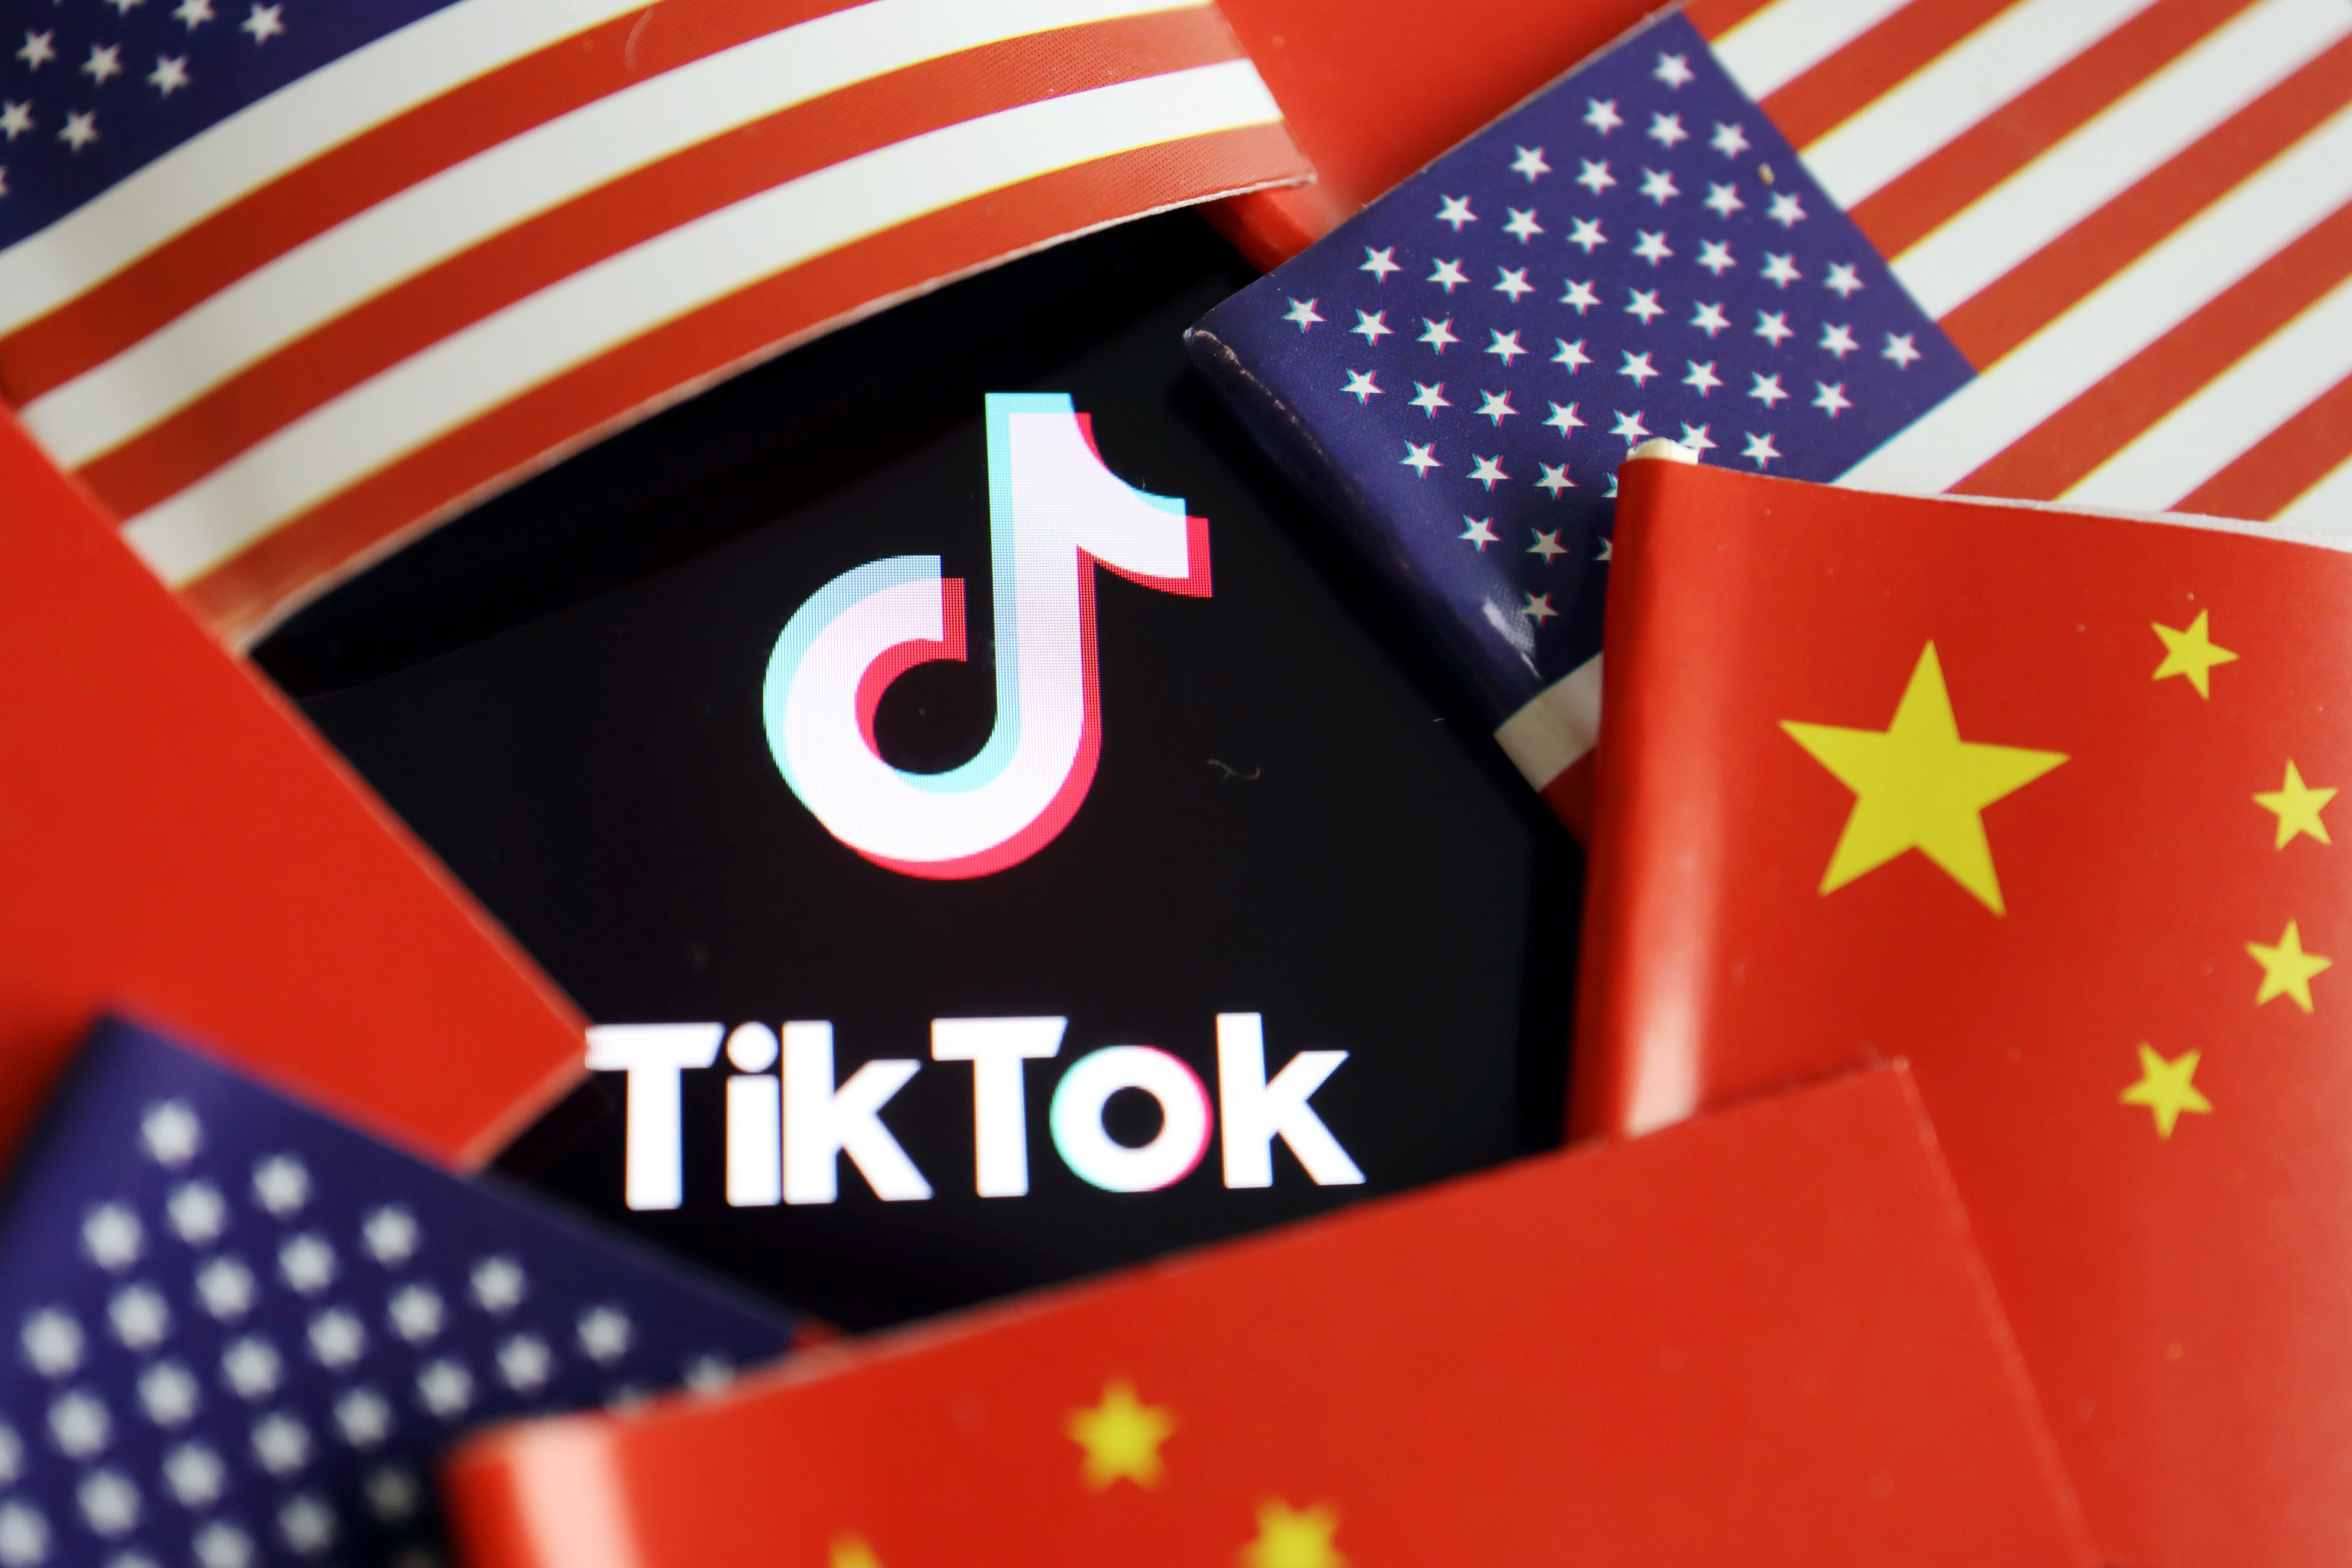 US President Donald Trump has issued orders for a ban on Chinese-owned TikTok and WeChat. Photo: Reuters